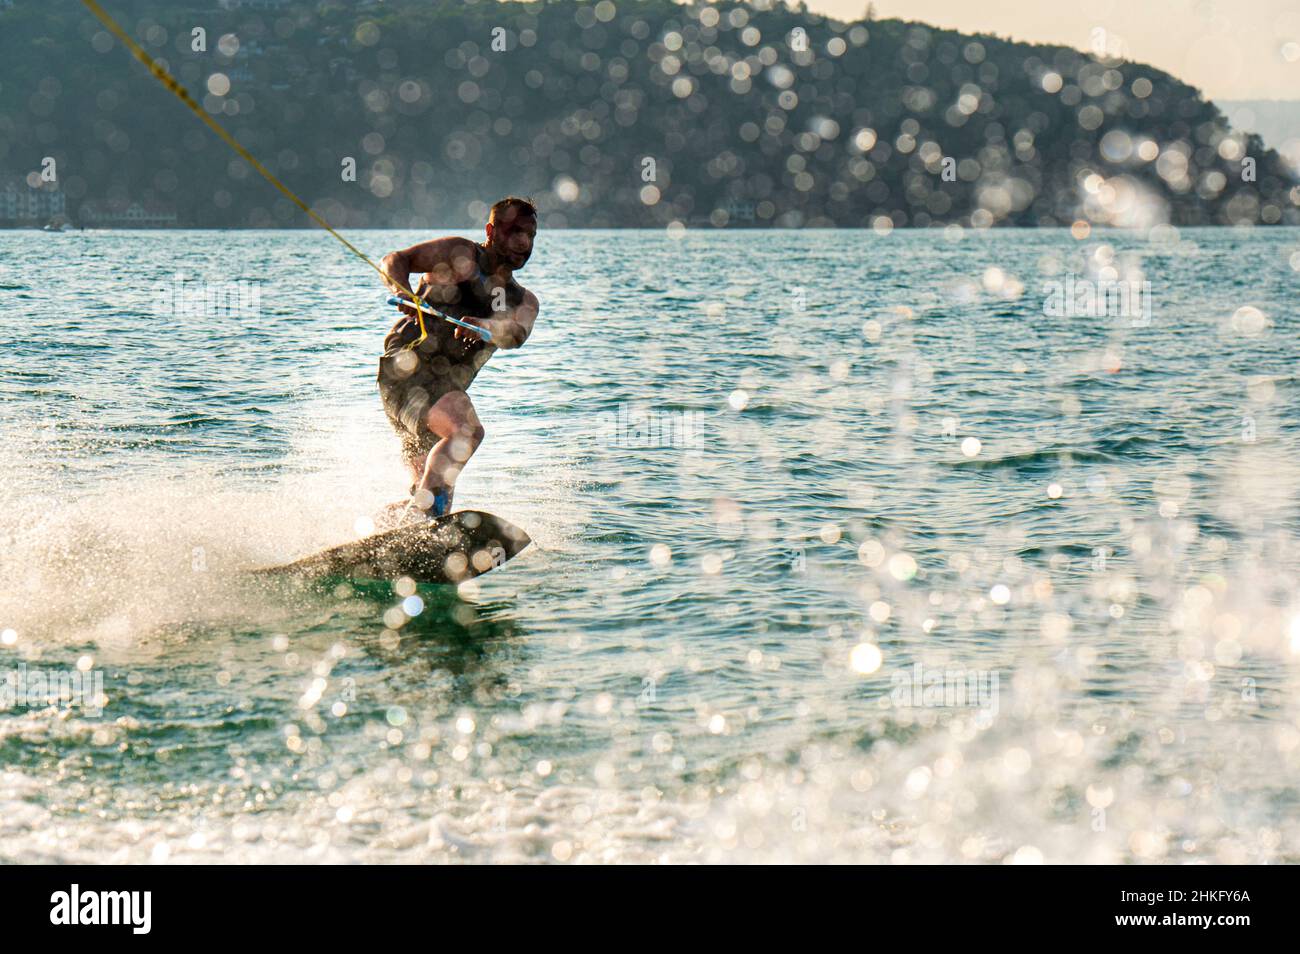 France, haute-Savoie (74), Annecy, Lac d'Annecy, wakeboarder Banque D'Images